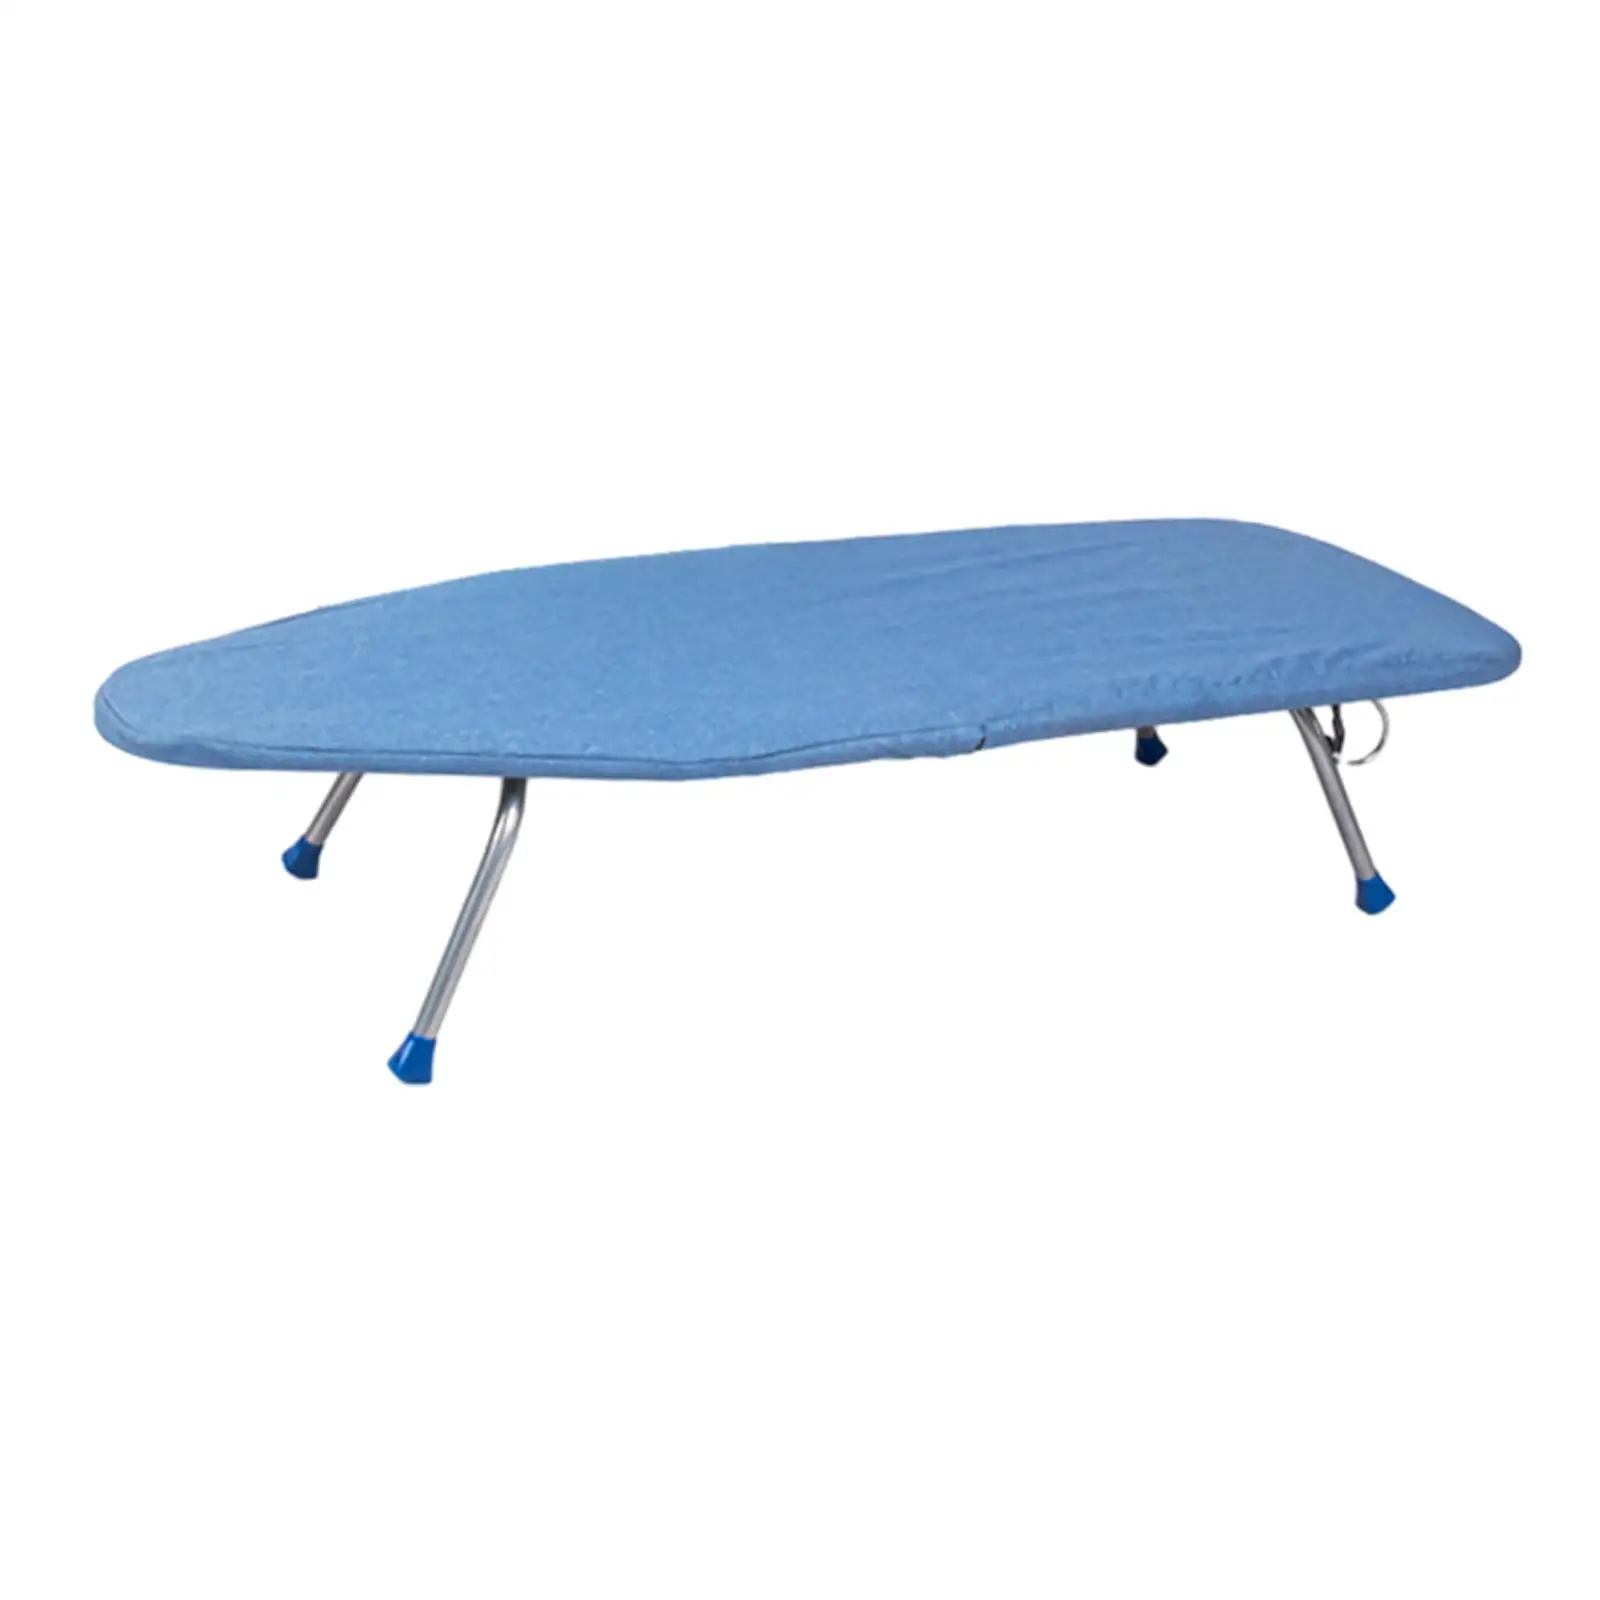 Tabletop Ironing Board Countertop Ironing Board Heat Resistant Cover Small Iron Board for Home Sewing Dorm Travel Craft Room